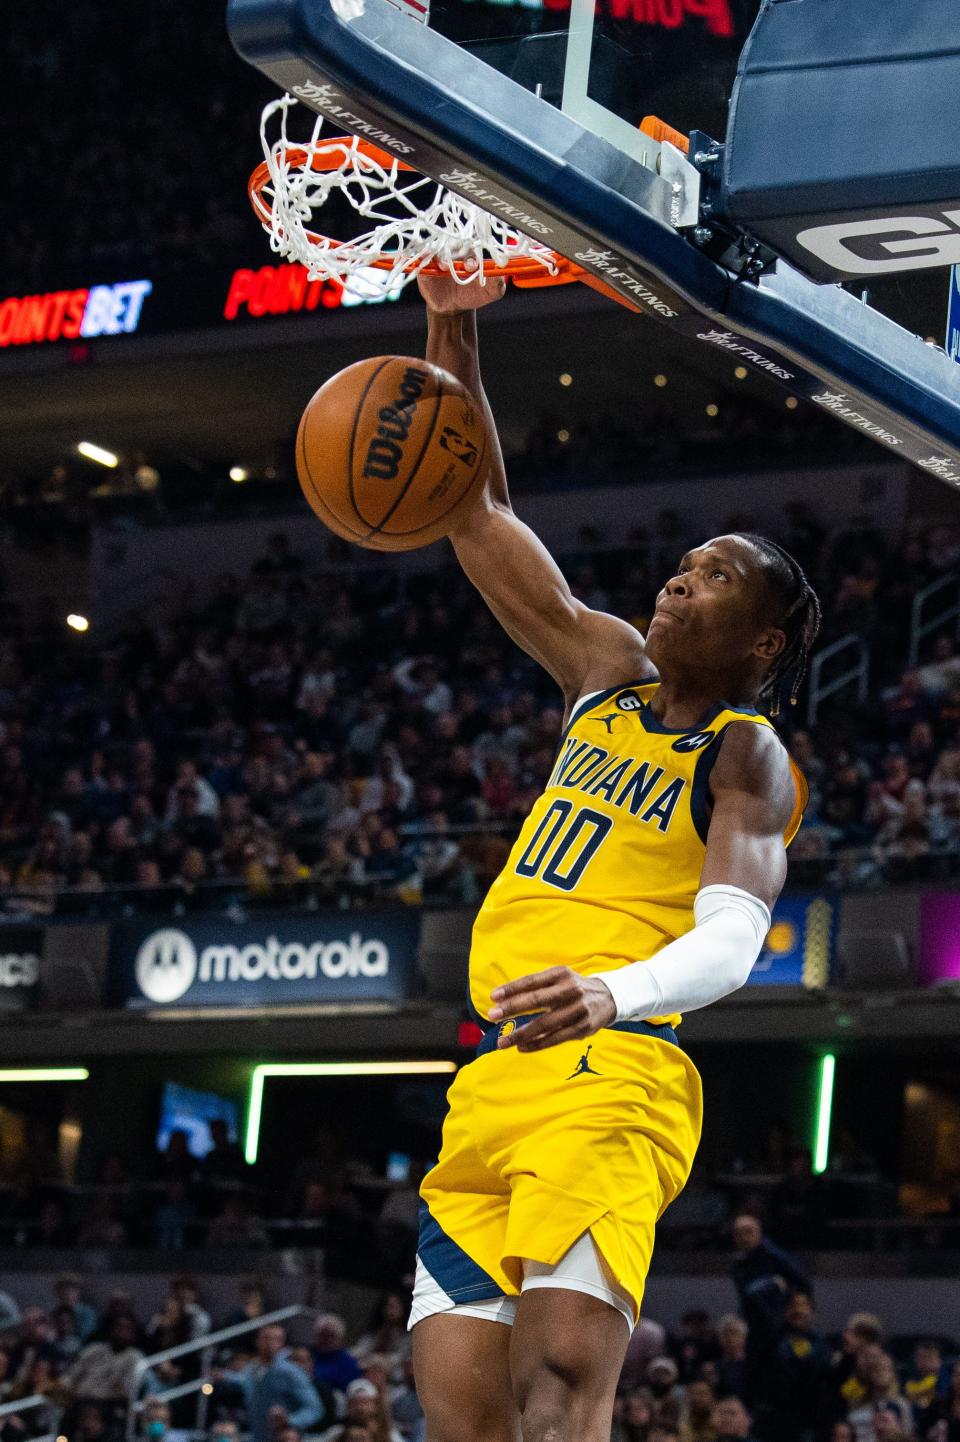 Feb 10, 2023; Indianapolis, Indiana, USA; Indiana Pacers guard Bennedict Mathurin (00) dunksl in the second quarter against the Phoenix Suns at Gainbridge Fieldhouse. Mandatory Credit: Trevor Ruszkowski-USA TODAY Sports